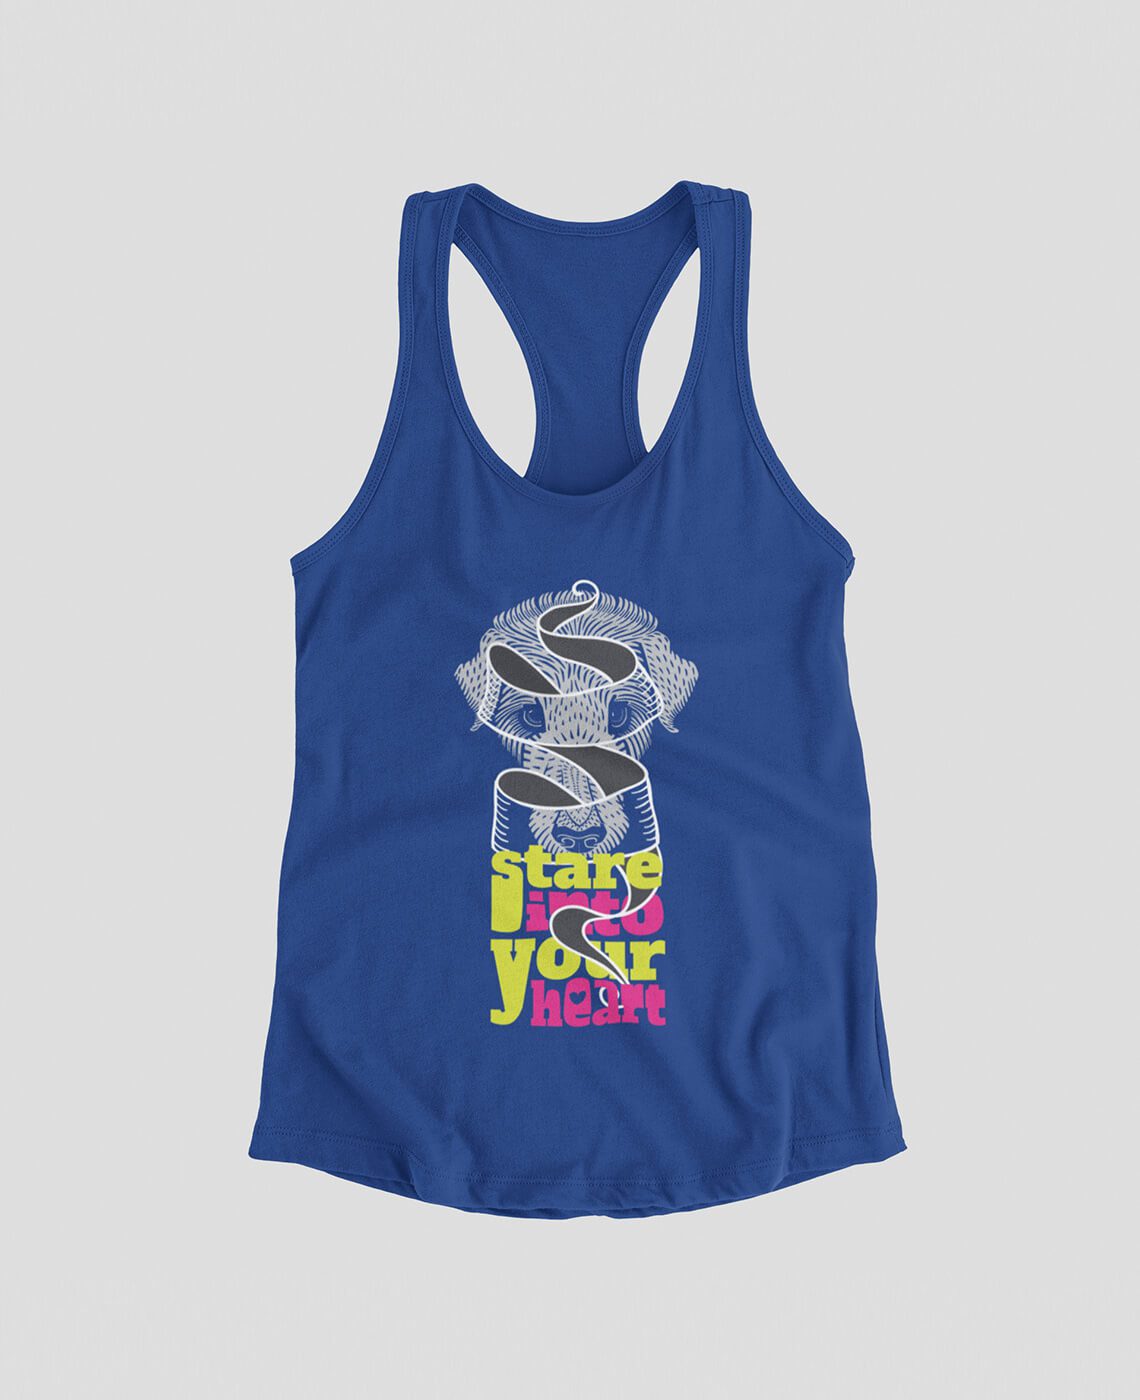 stare one 7 womens tank top 3